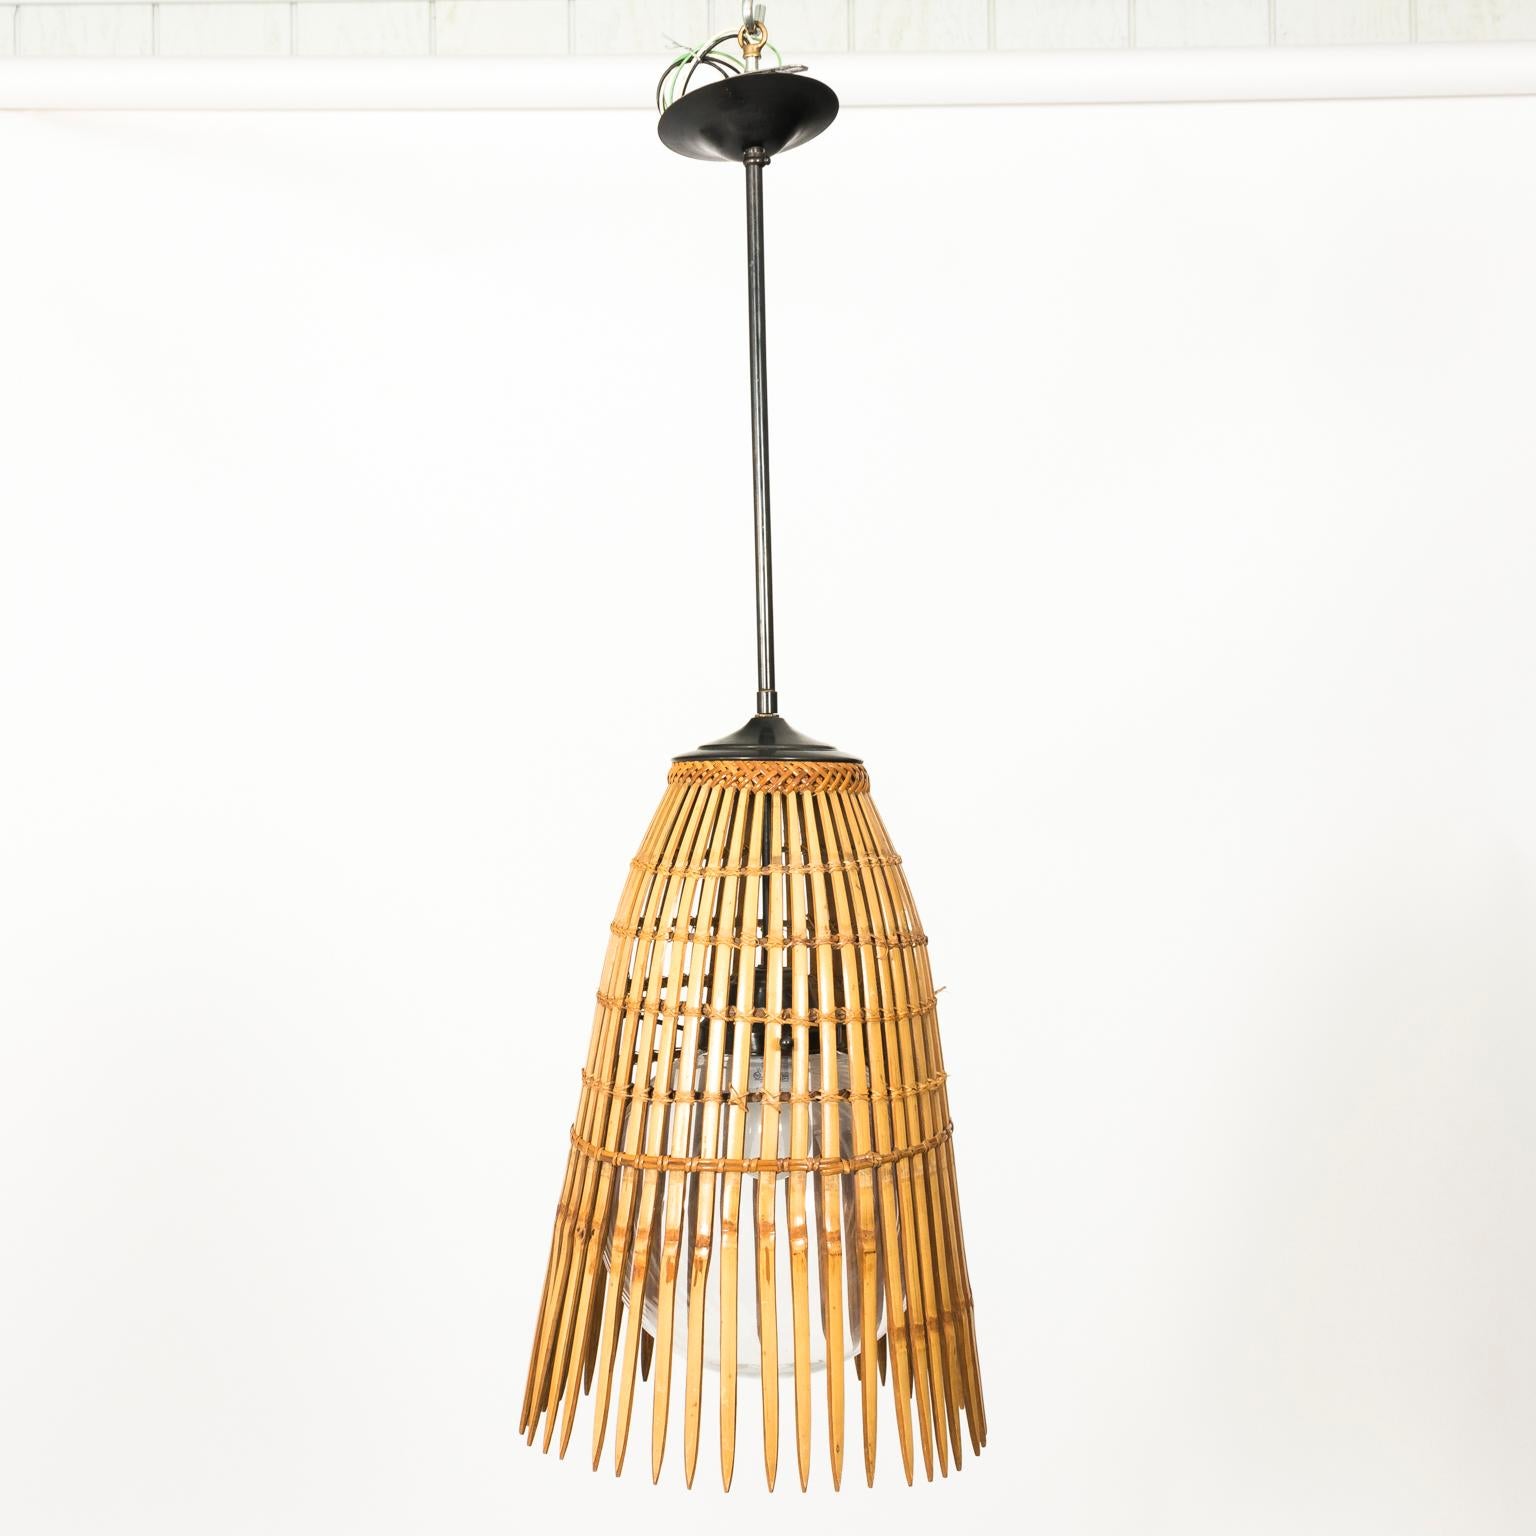 Mid-20th century bamboo ceiling light with glass dome insert and rattan braided trim.
 